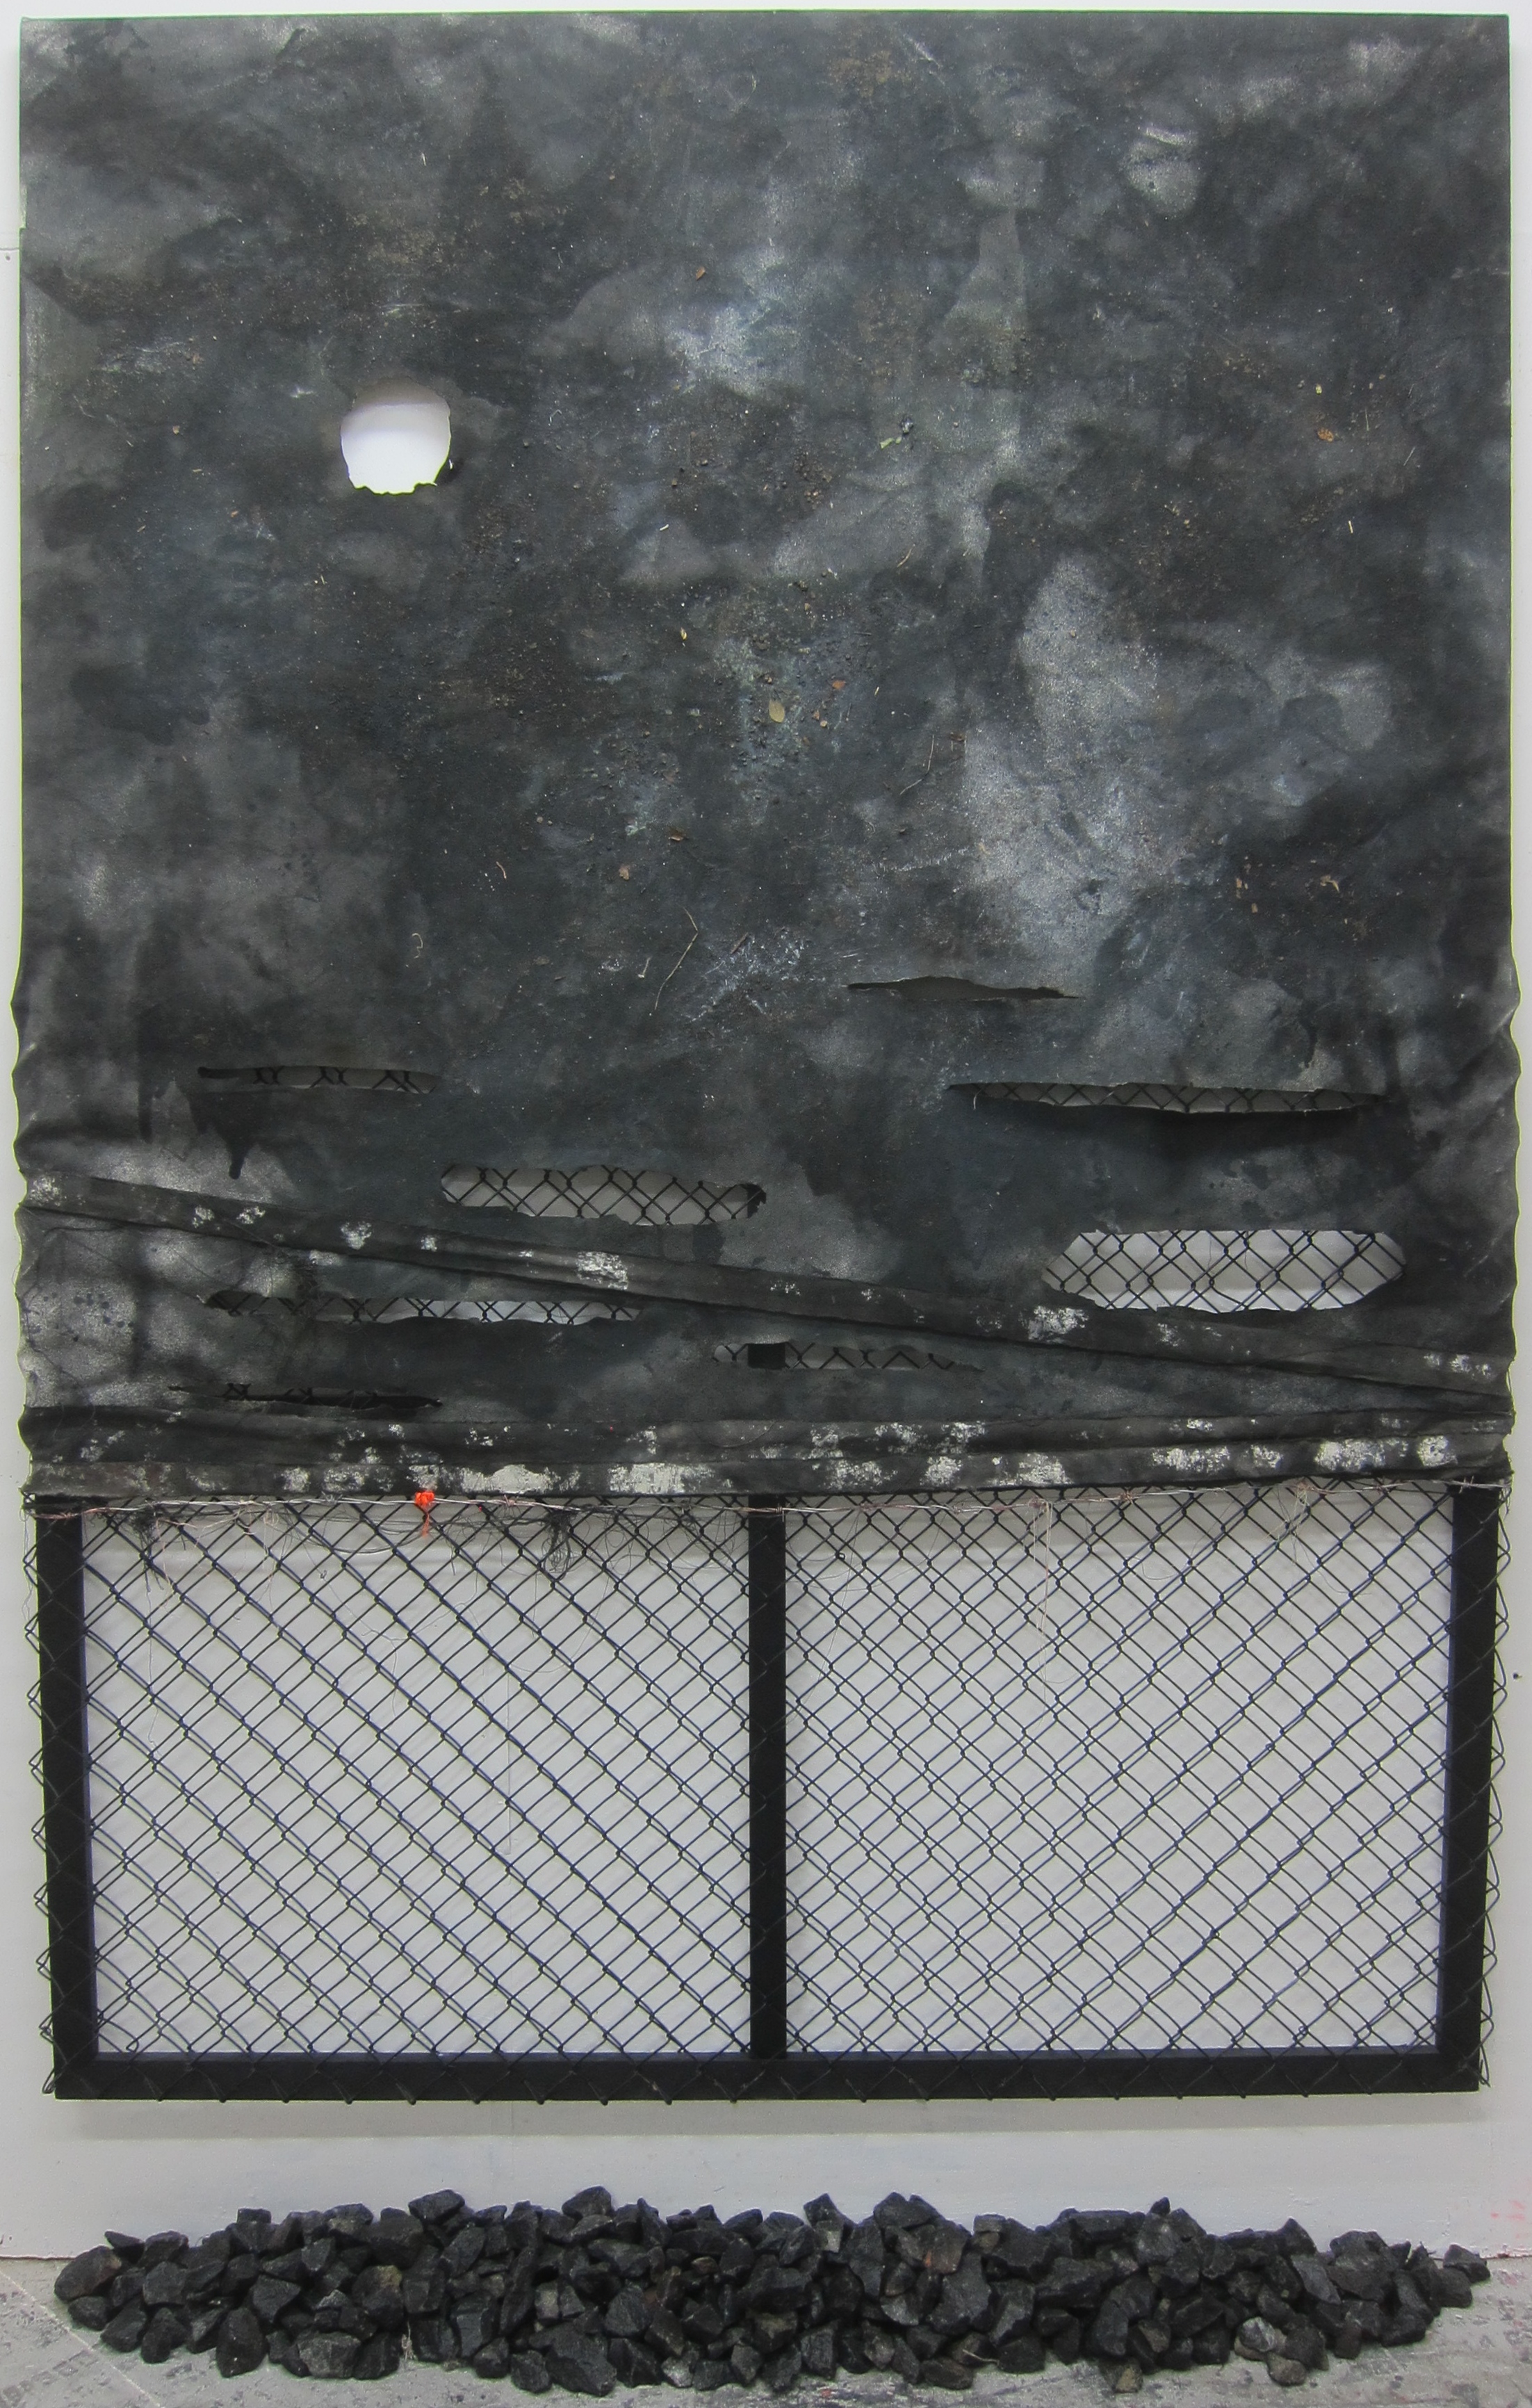   Trespass.   Alkyd resin, ink, soil, barbed wire, polyester, fence, granite, wood, cotton &amp; fire.&nbsp;  260 x 172 cm.  2015. 